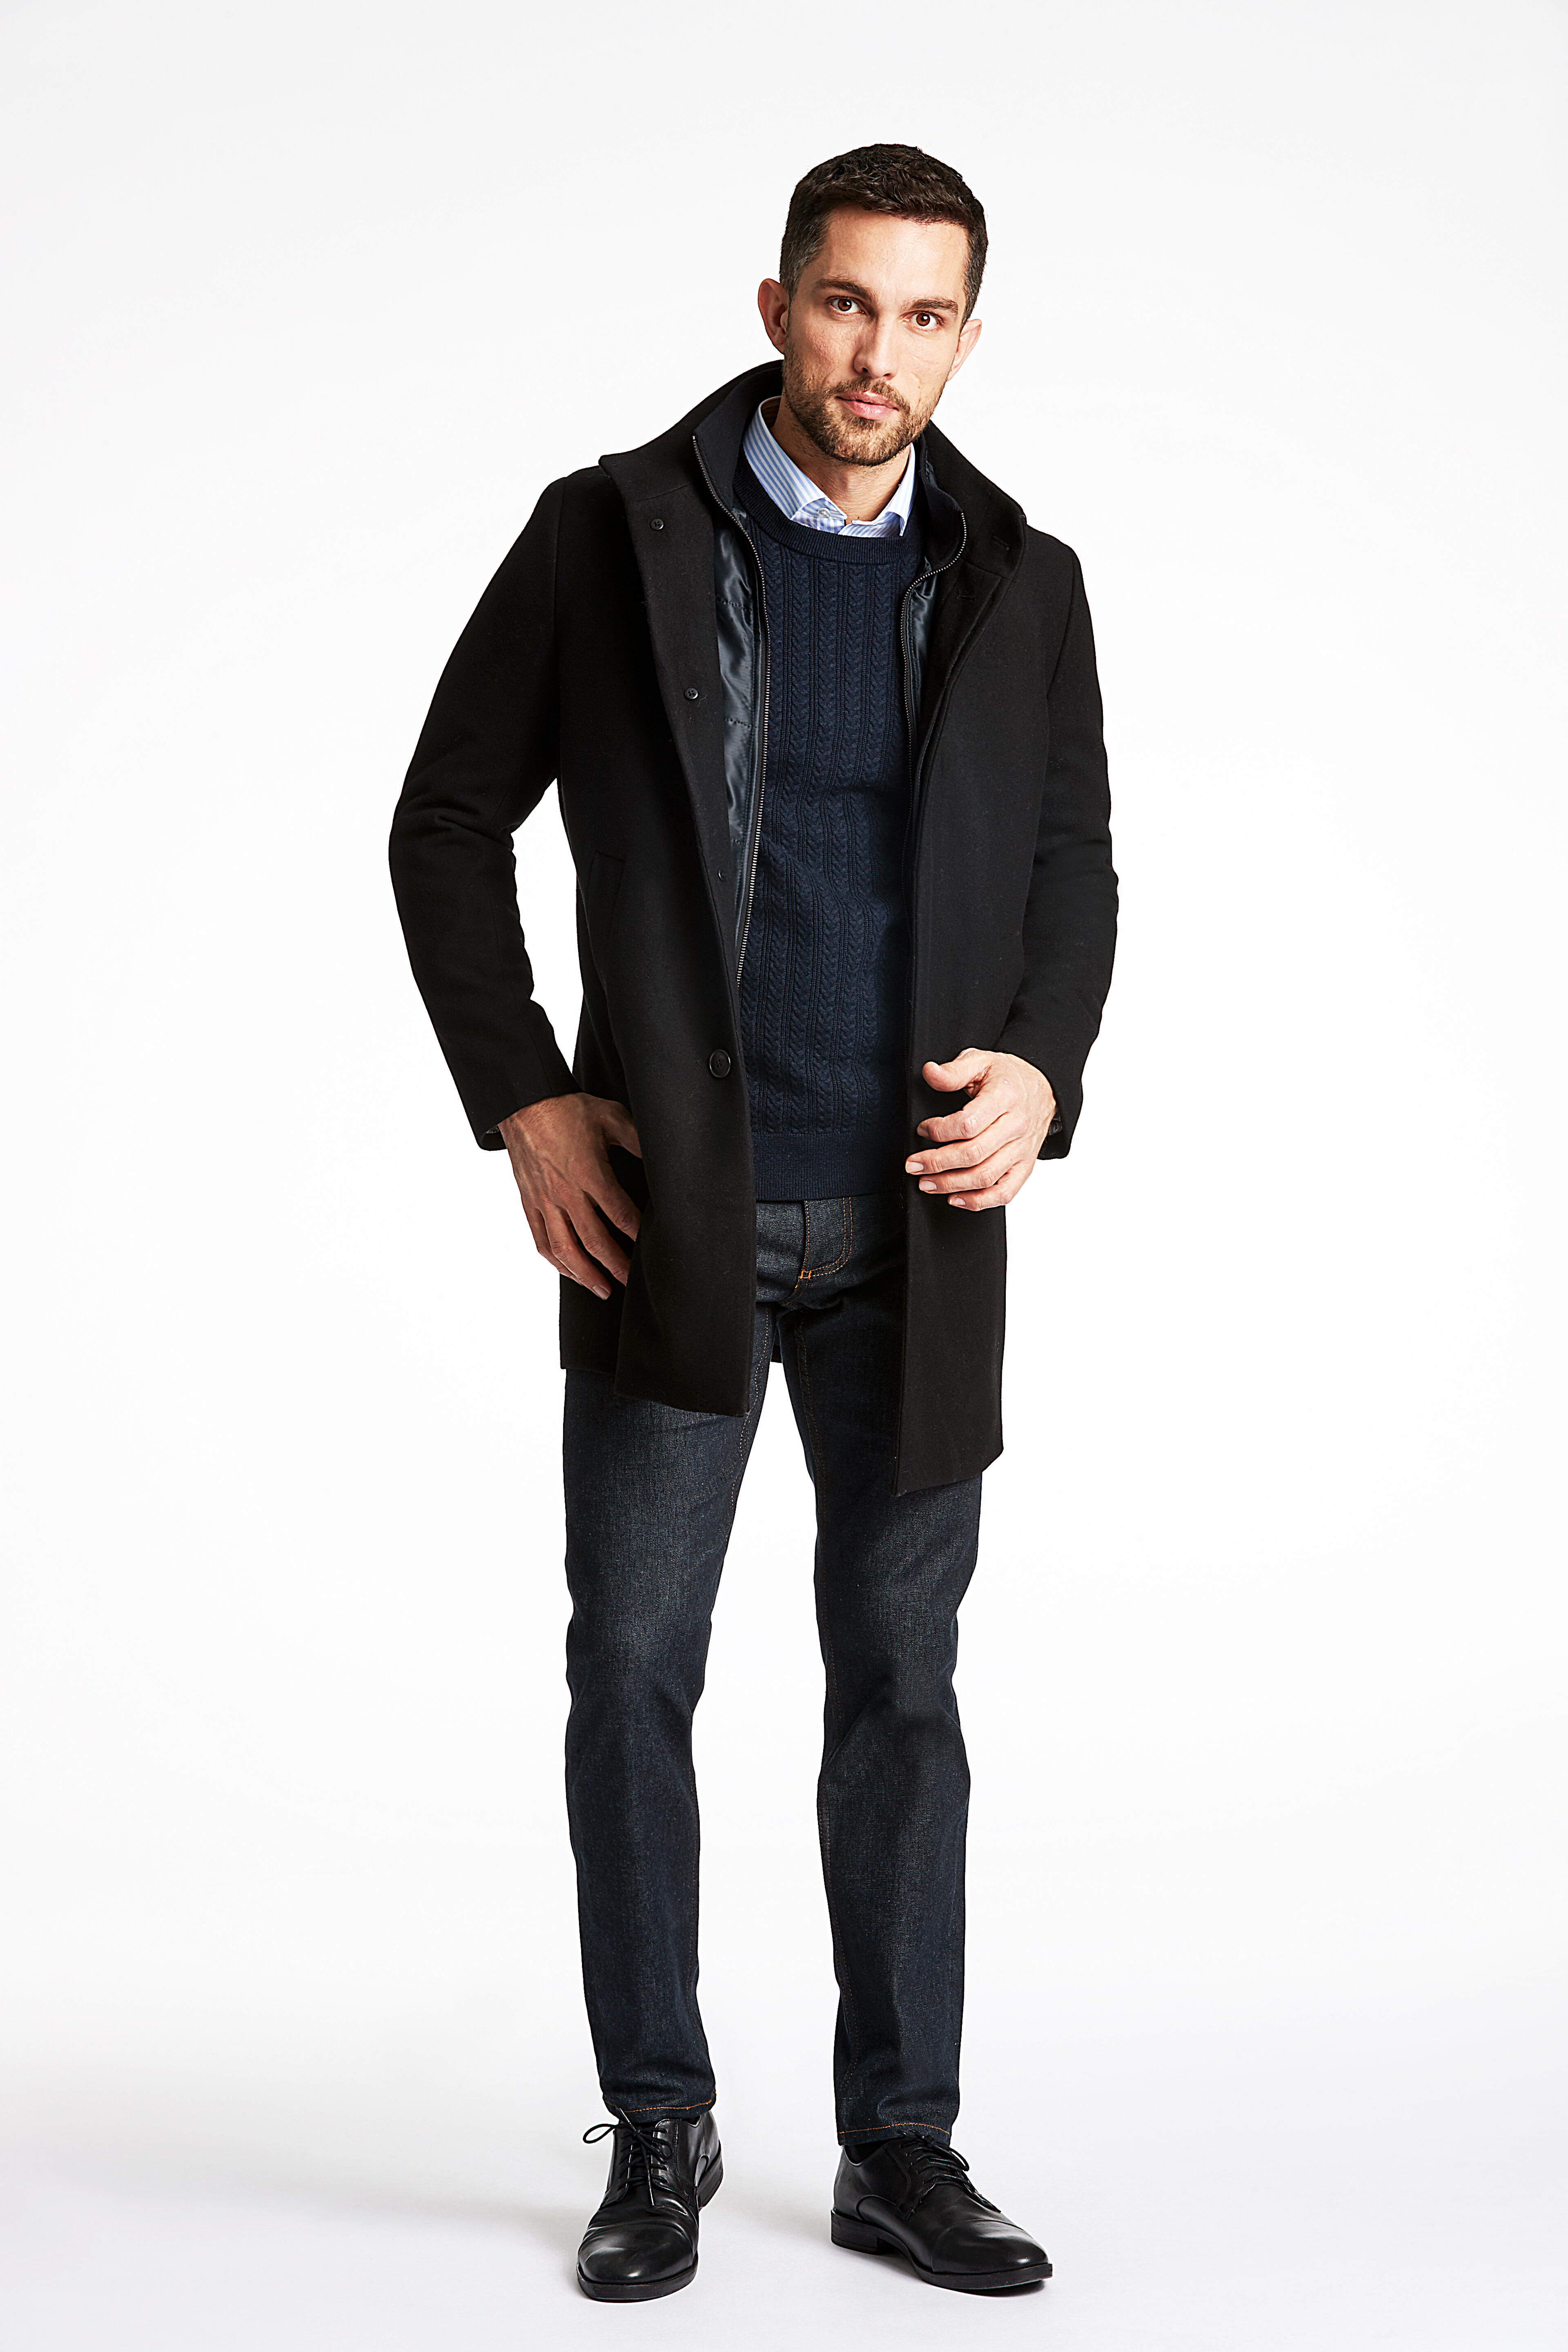 Coat | Relaxed fit 30-342016